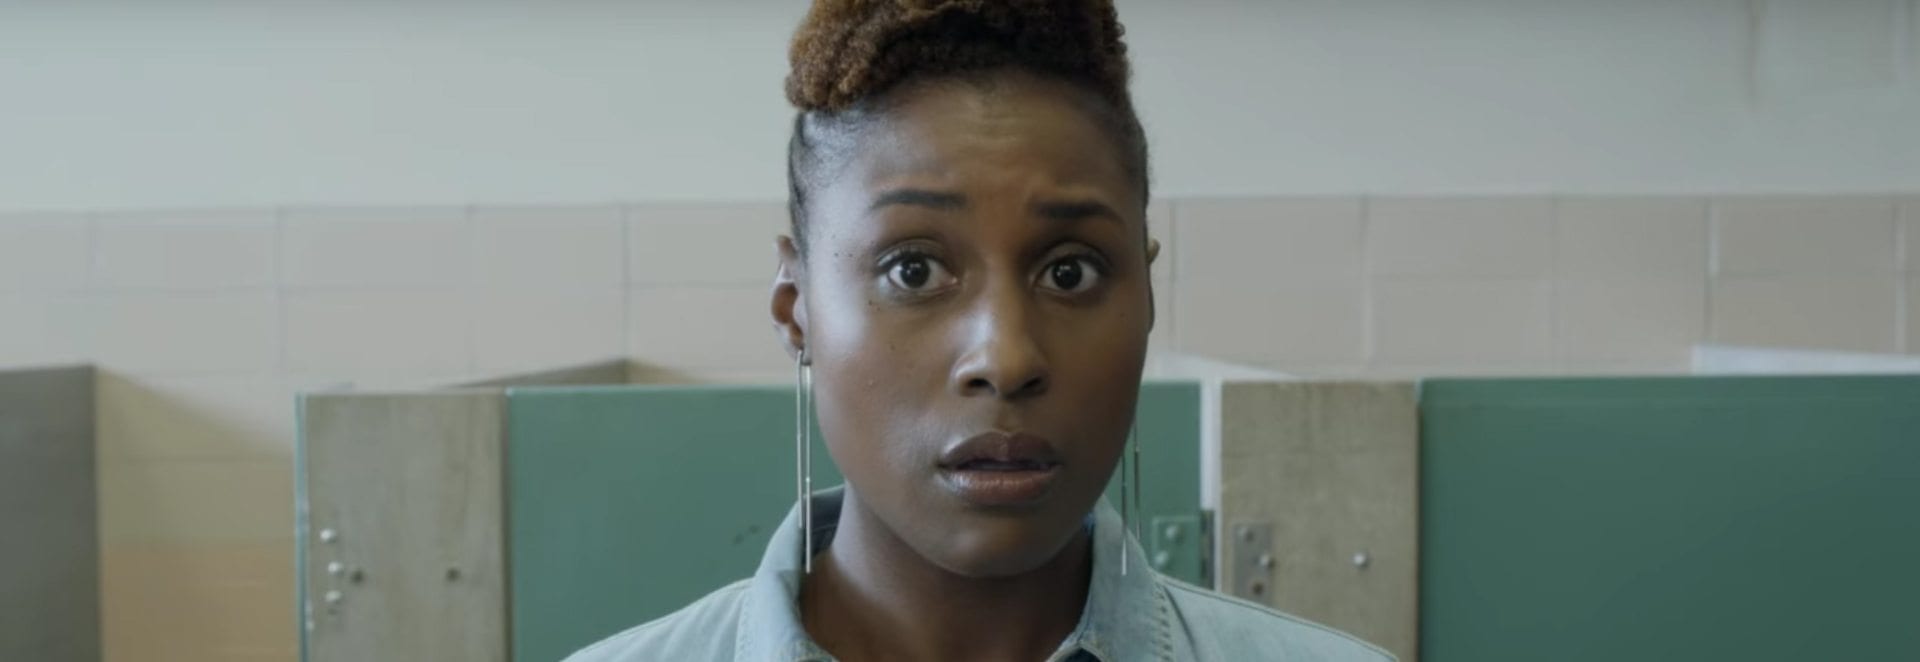 HBO continues to suffer from additional leaks, with the latest episode of Issa Rae’s ‘Insecure’ and ‘Curb Your Enthusiasm’ having been stolen.